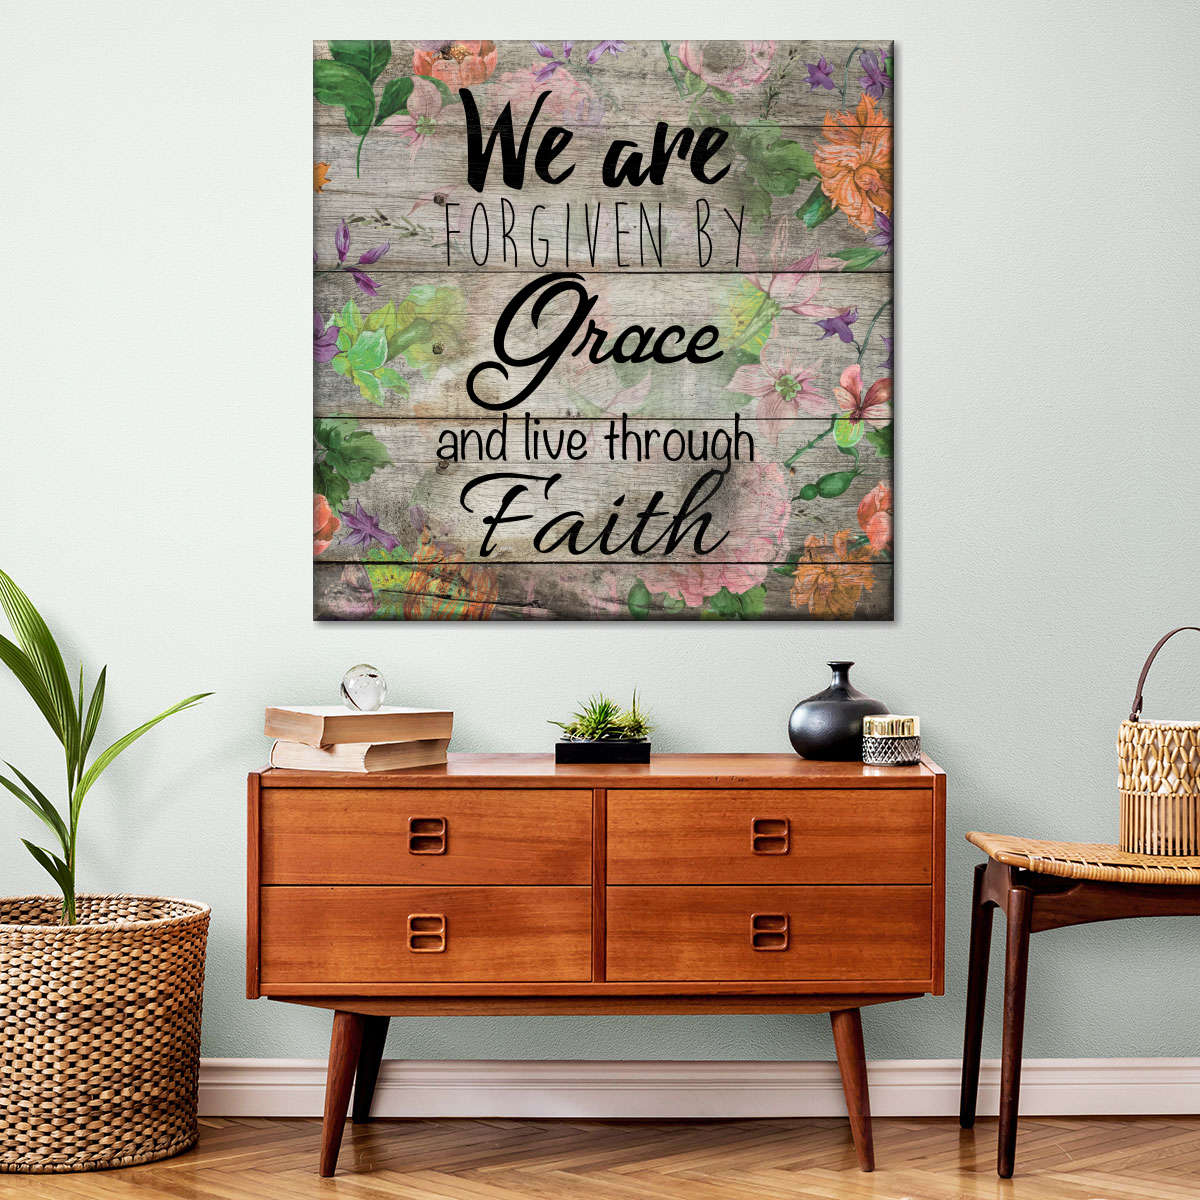 Grace And Faith II Square Canvas Wall Art - Christian Wall Decor - Christian Wall Hanging